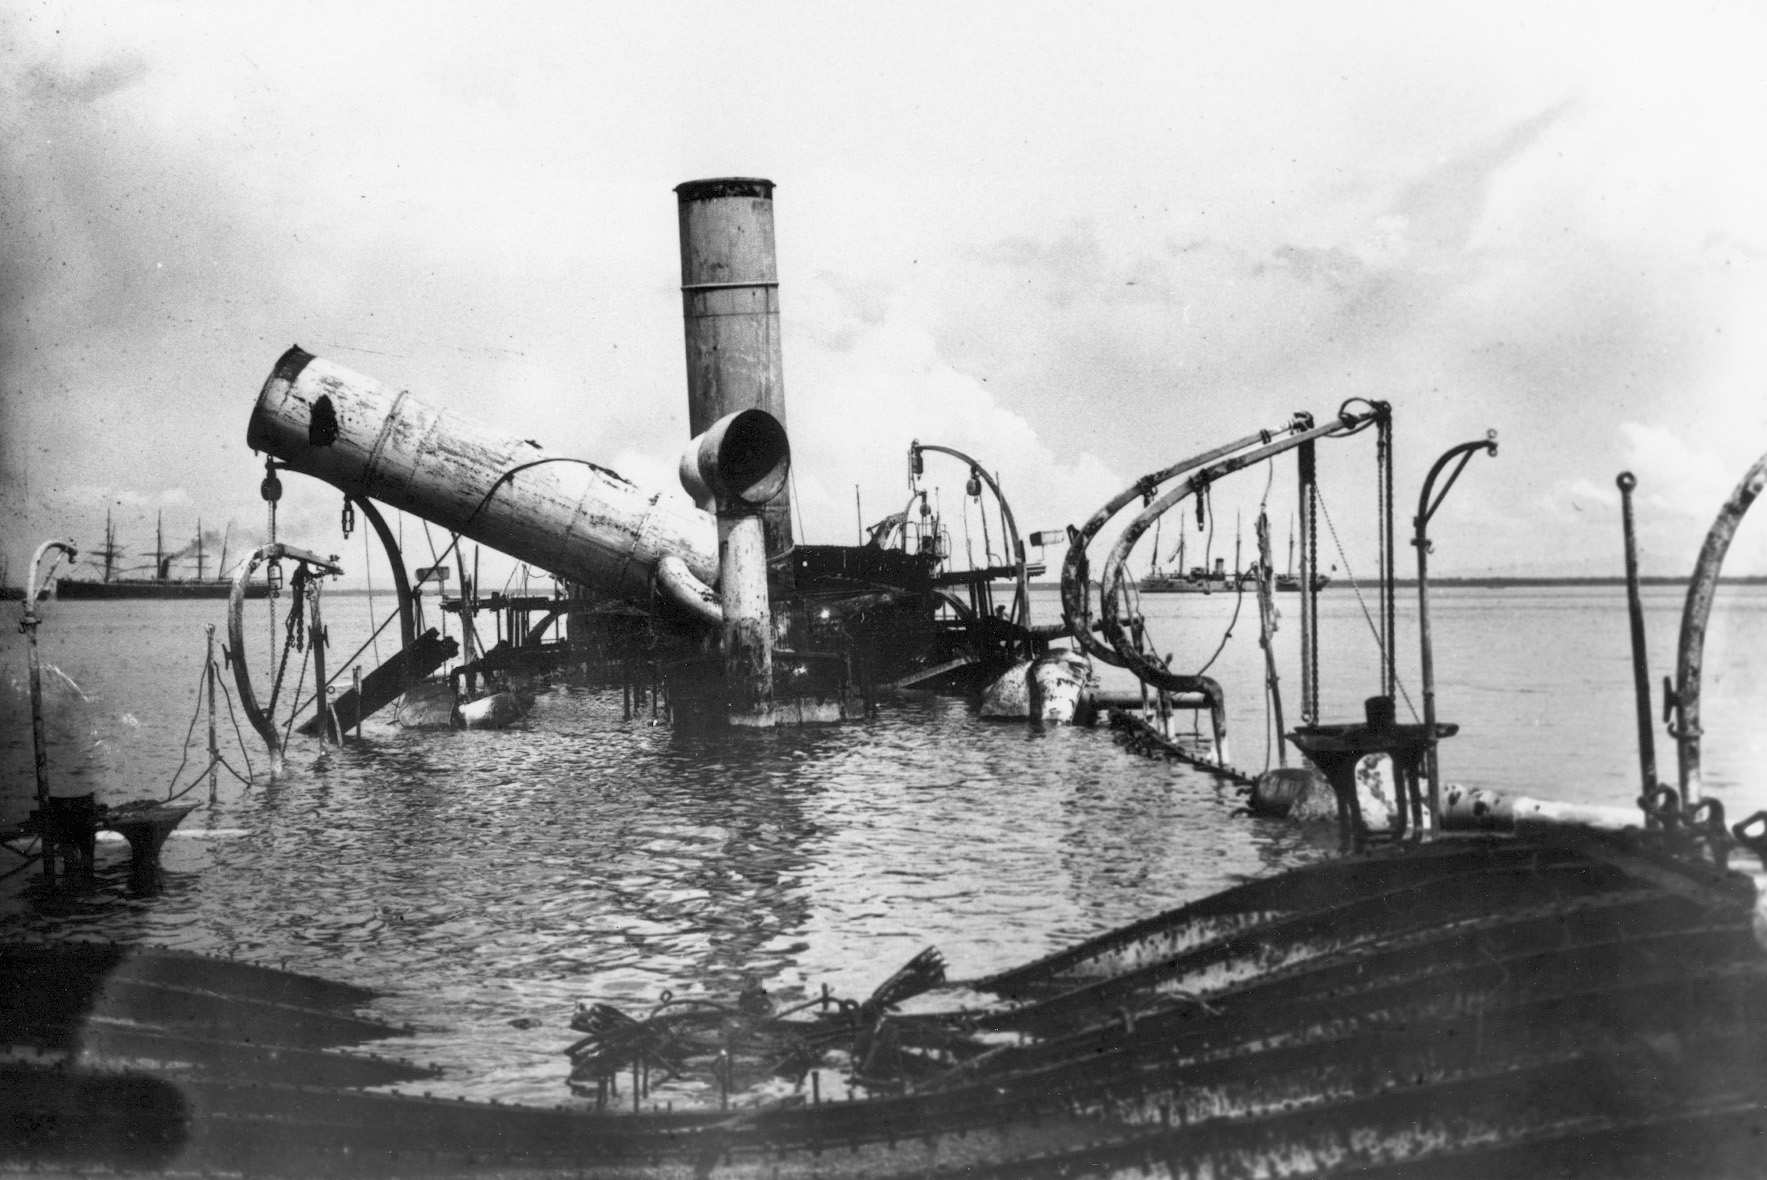 The wreck of the cruiser Reina Cristina, which steamed out to challenge the American ships.